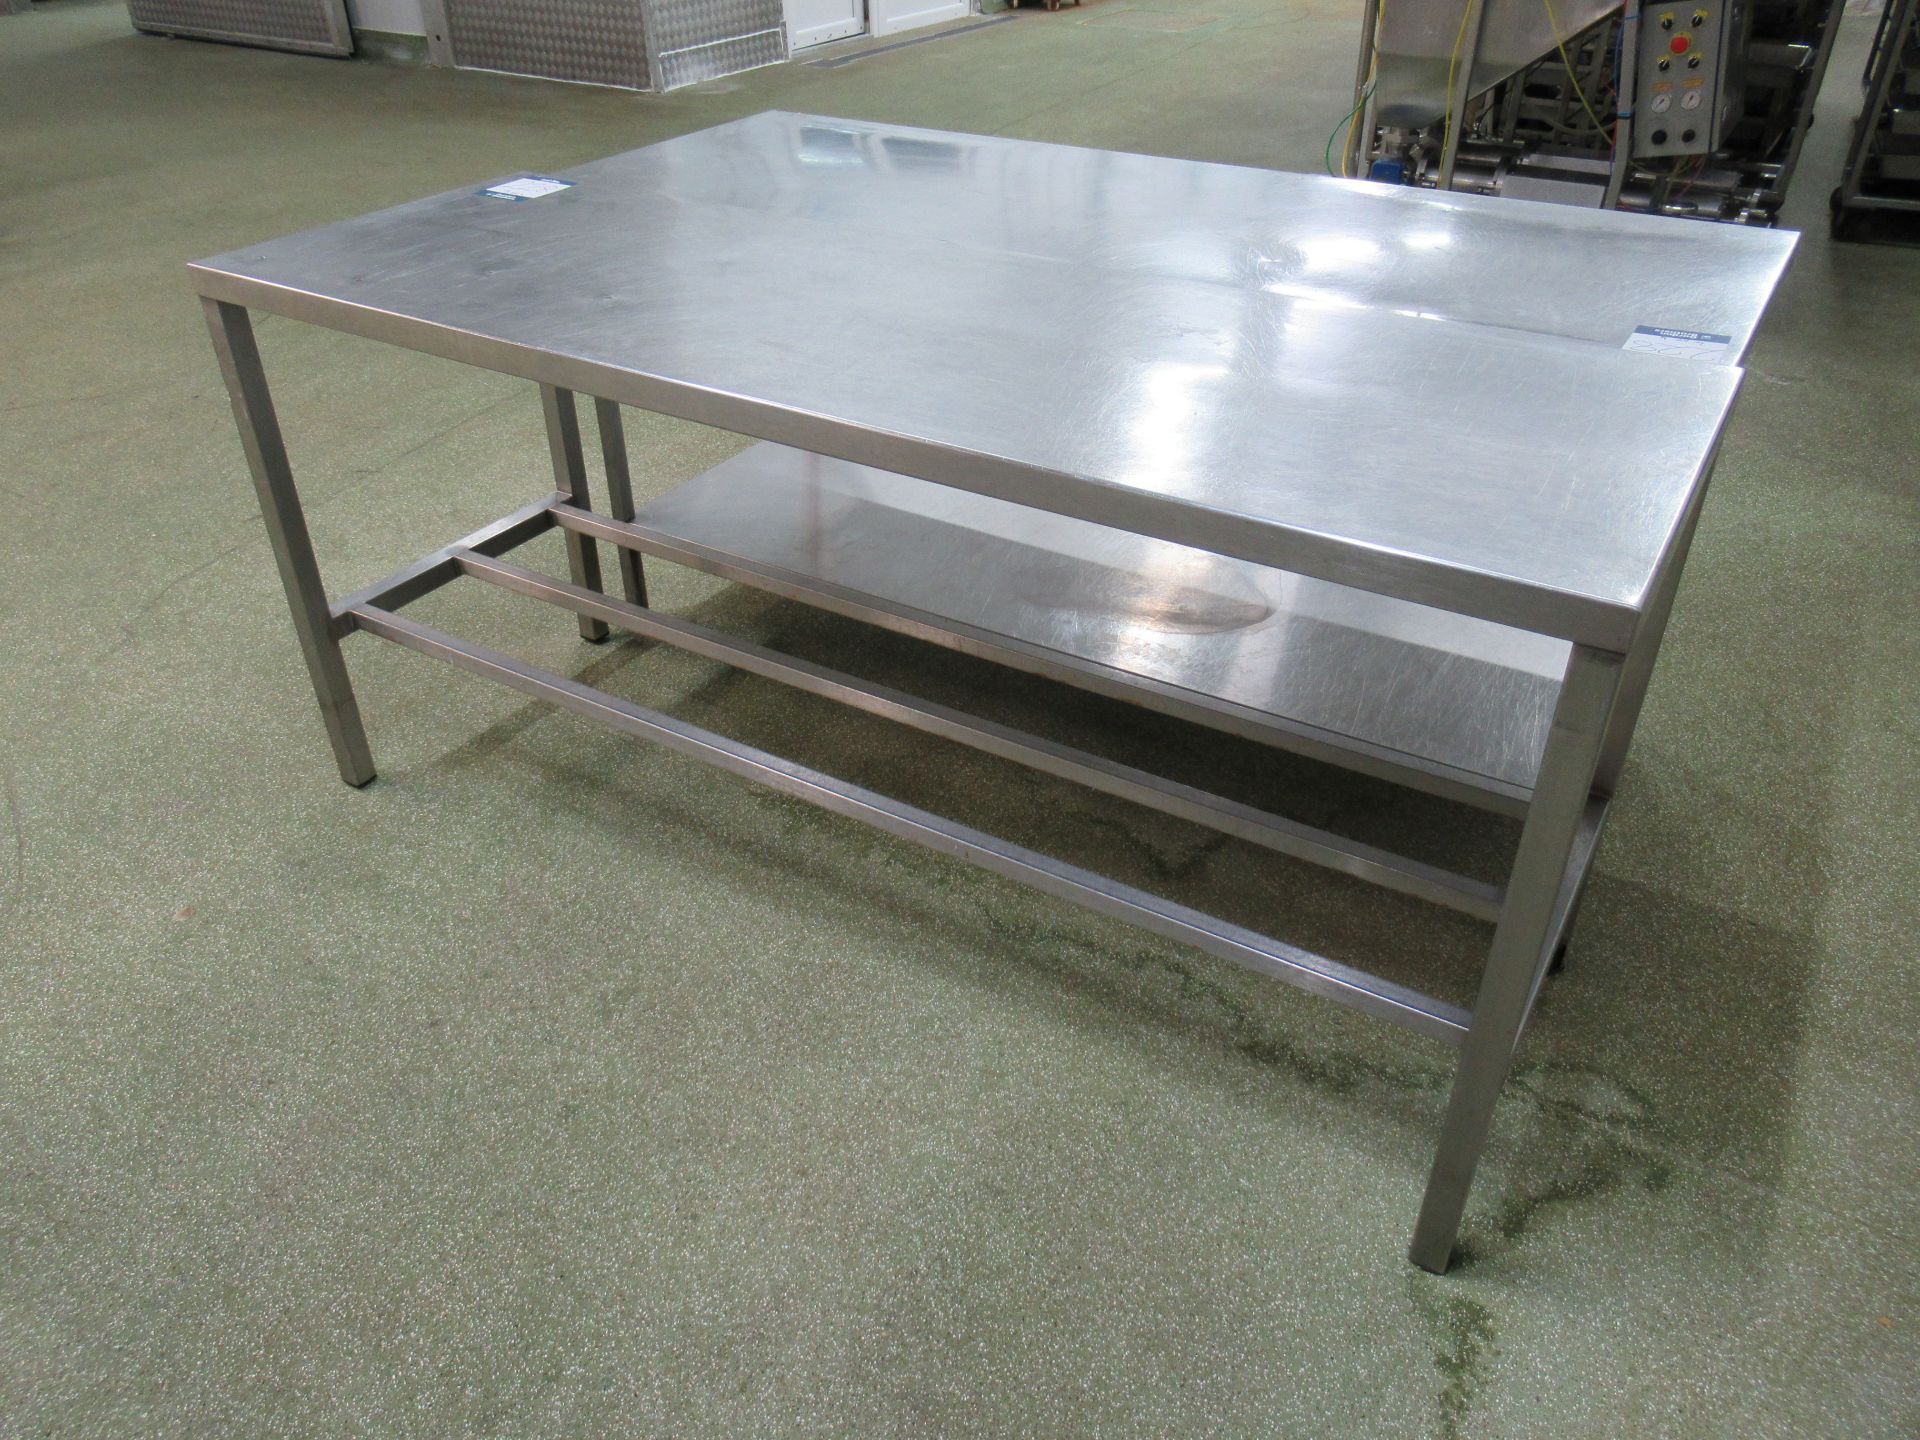 4 Stainless steel tables, one with 1800 x 600mm work surface and three with 1800 x 650mm work - Image 6 of 8